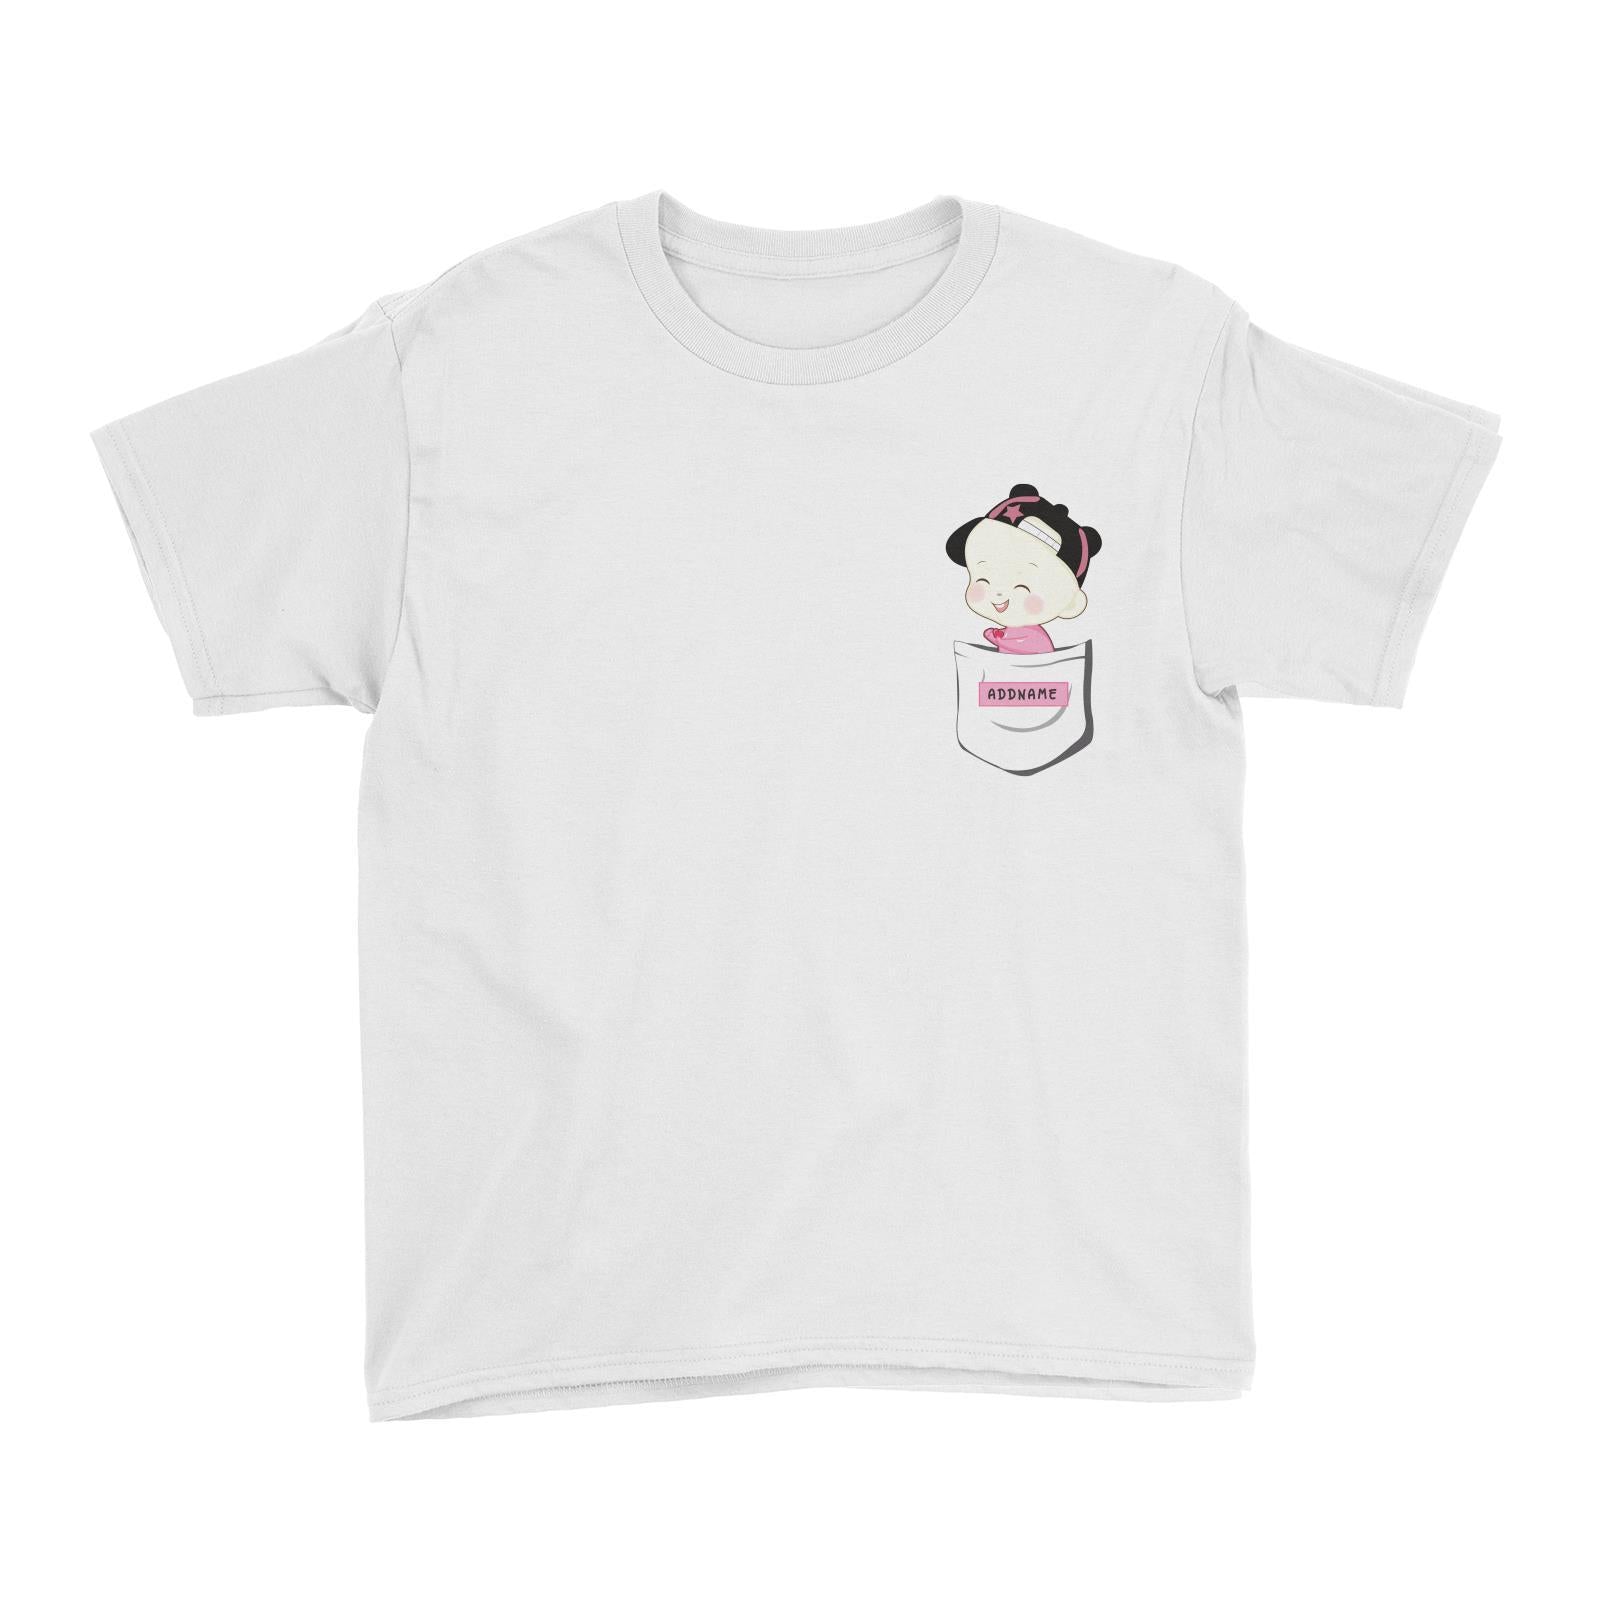 My Lovely Family Series Pocket Size Baby Girl Addname Kid's T-Shirt